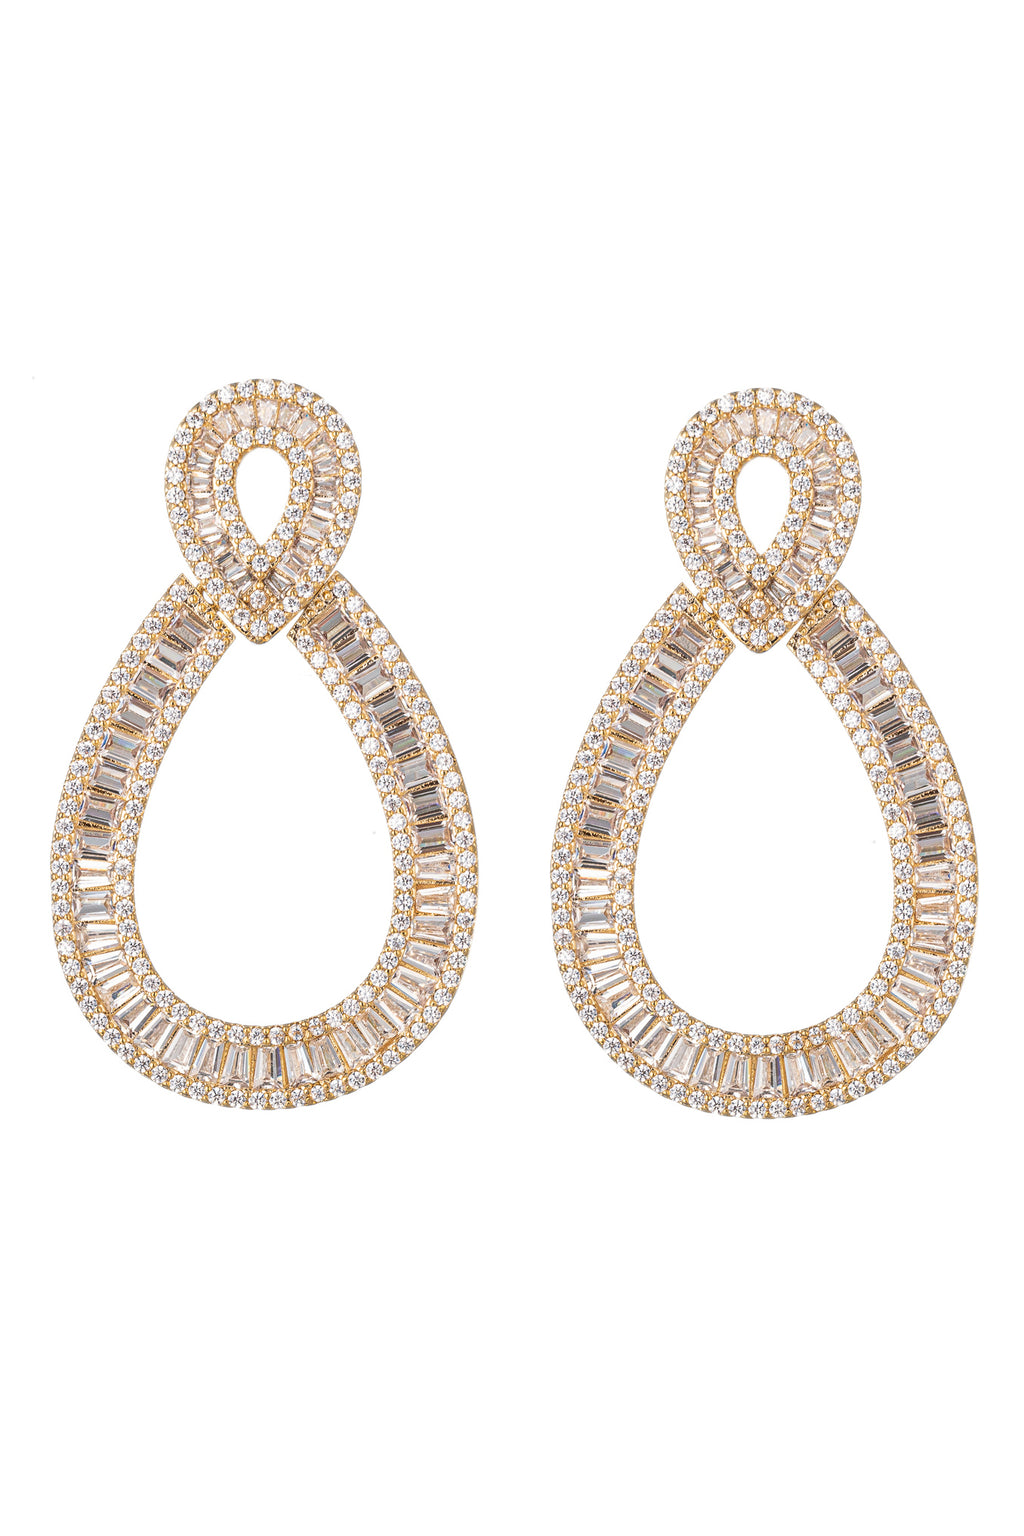 Gold tone brass wedding statement drop earrings studded with CZ crystals.